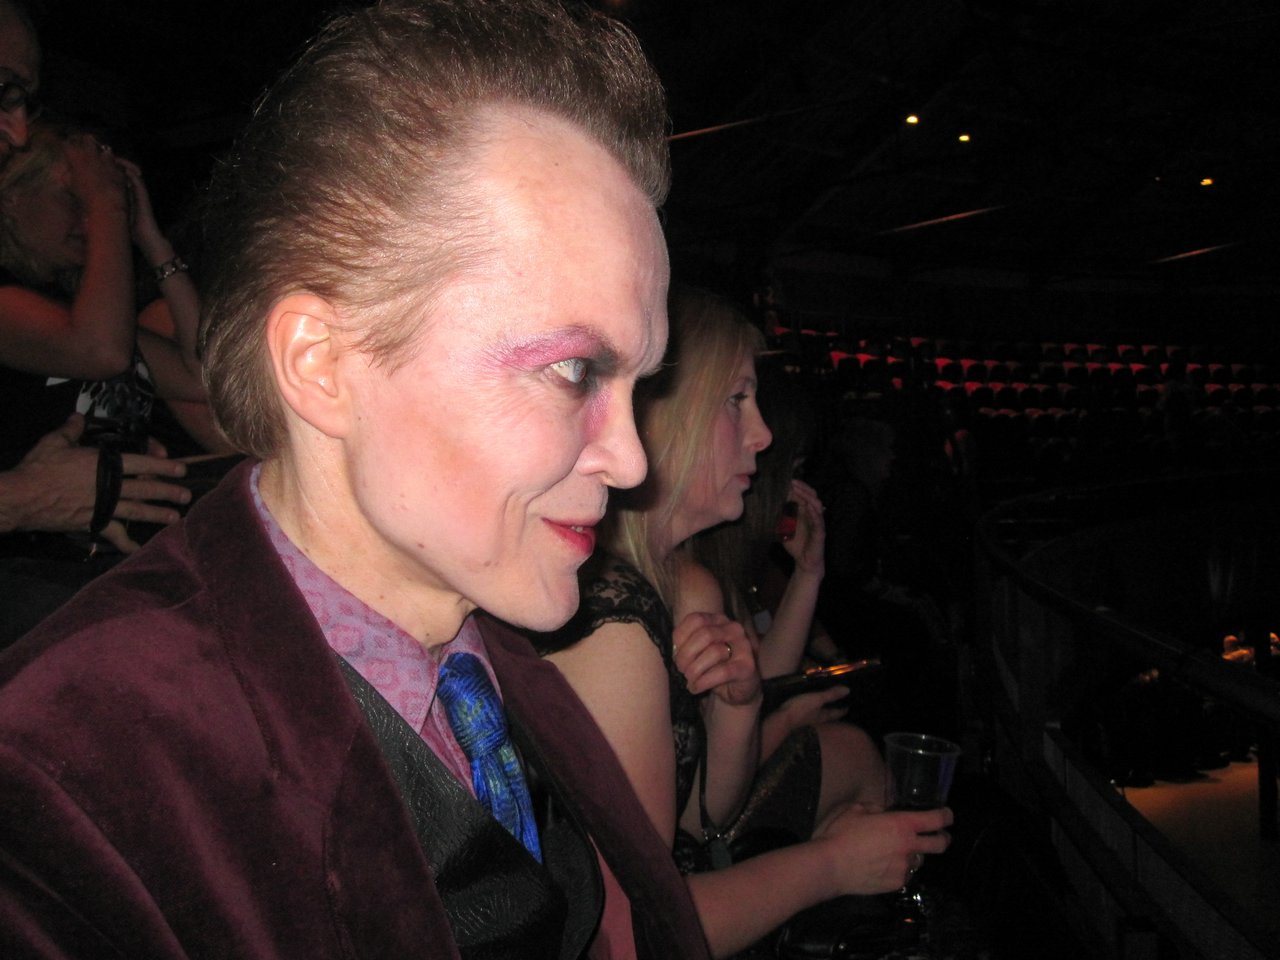 06 Mr Normall watching Adam Ant on stage.jpg